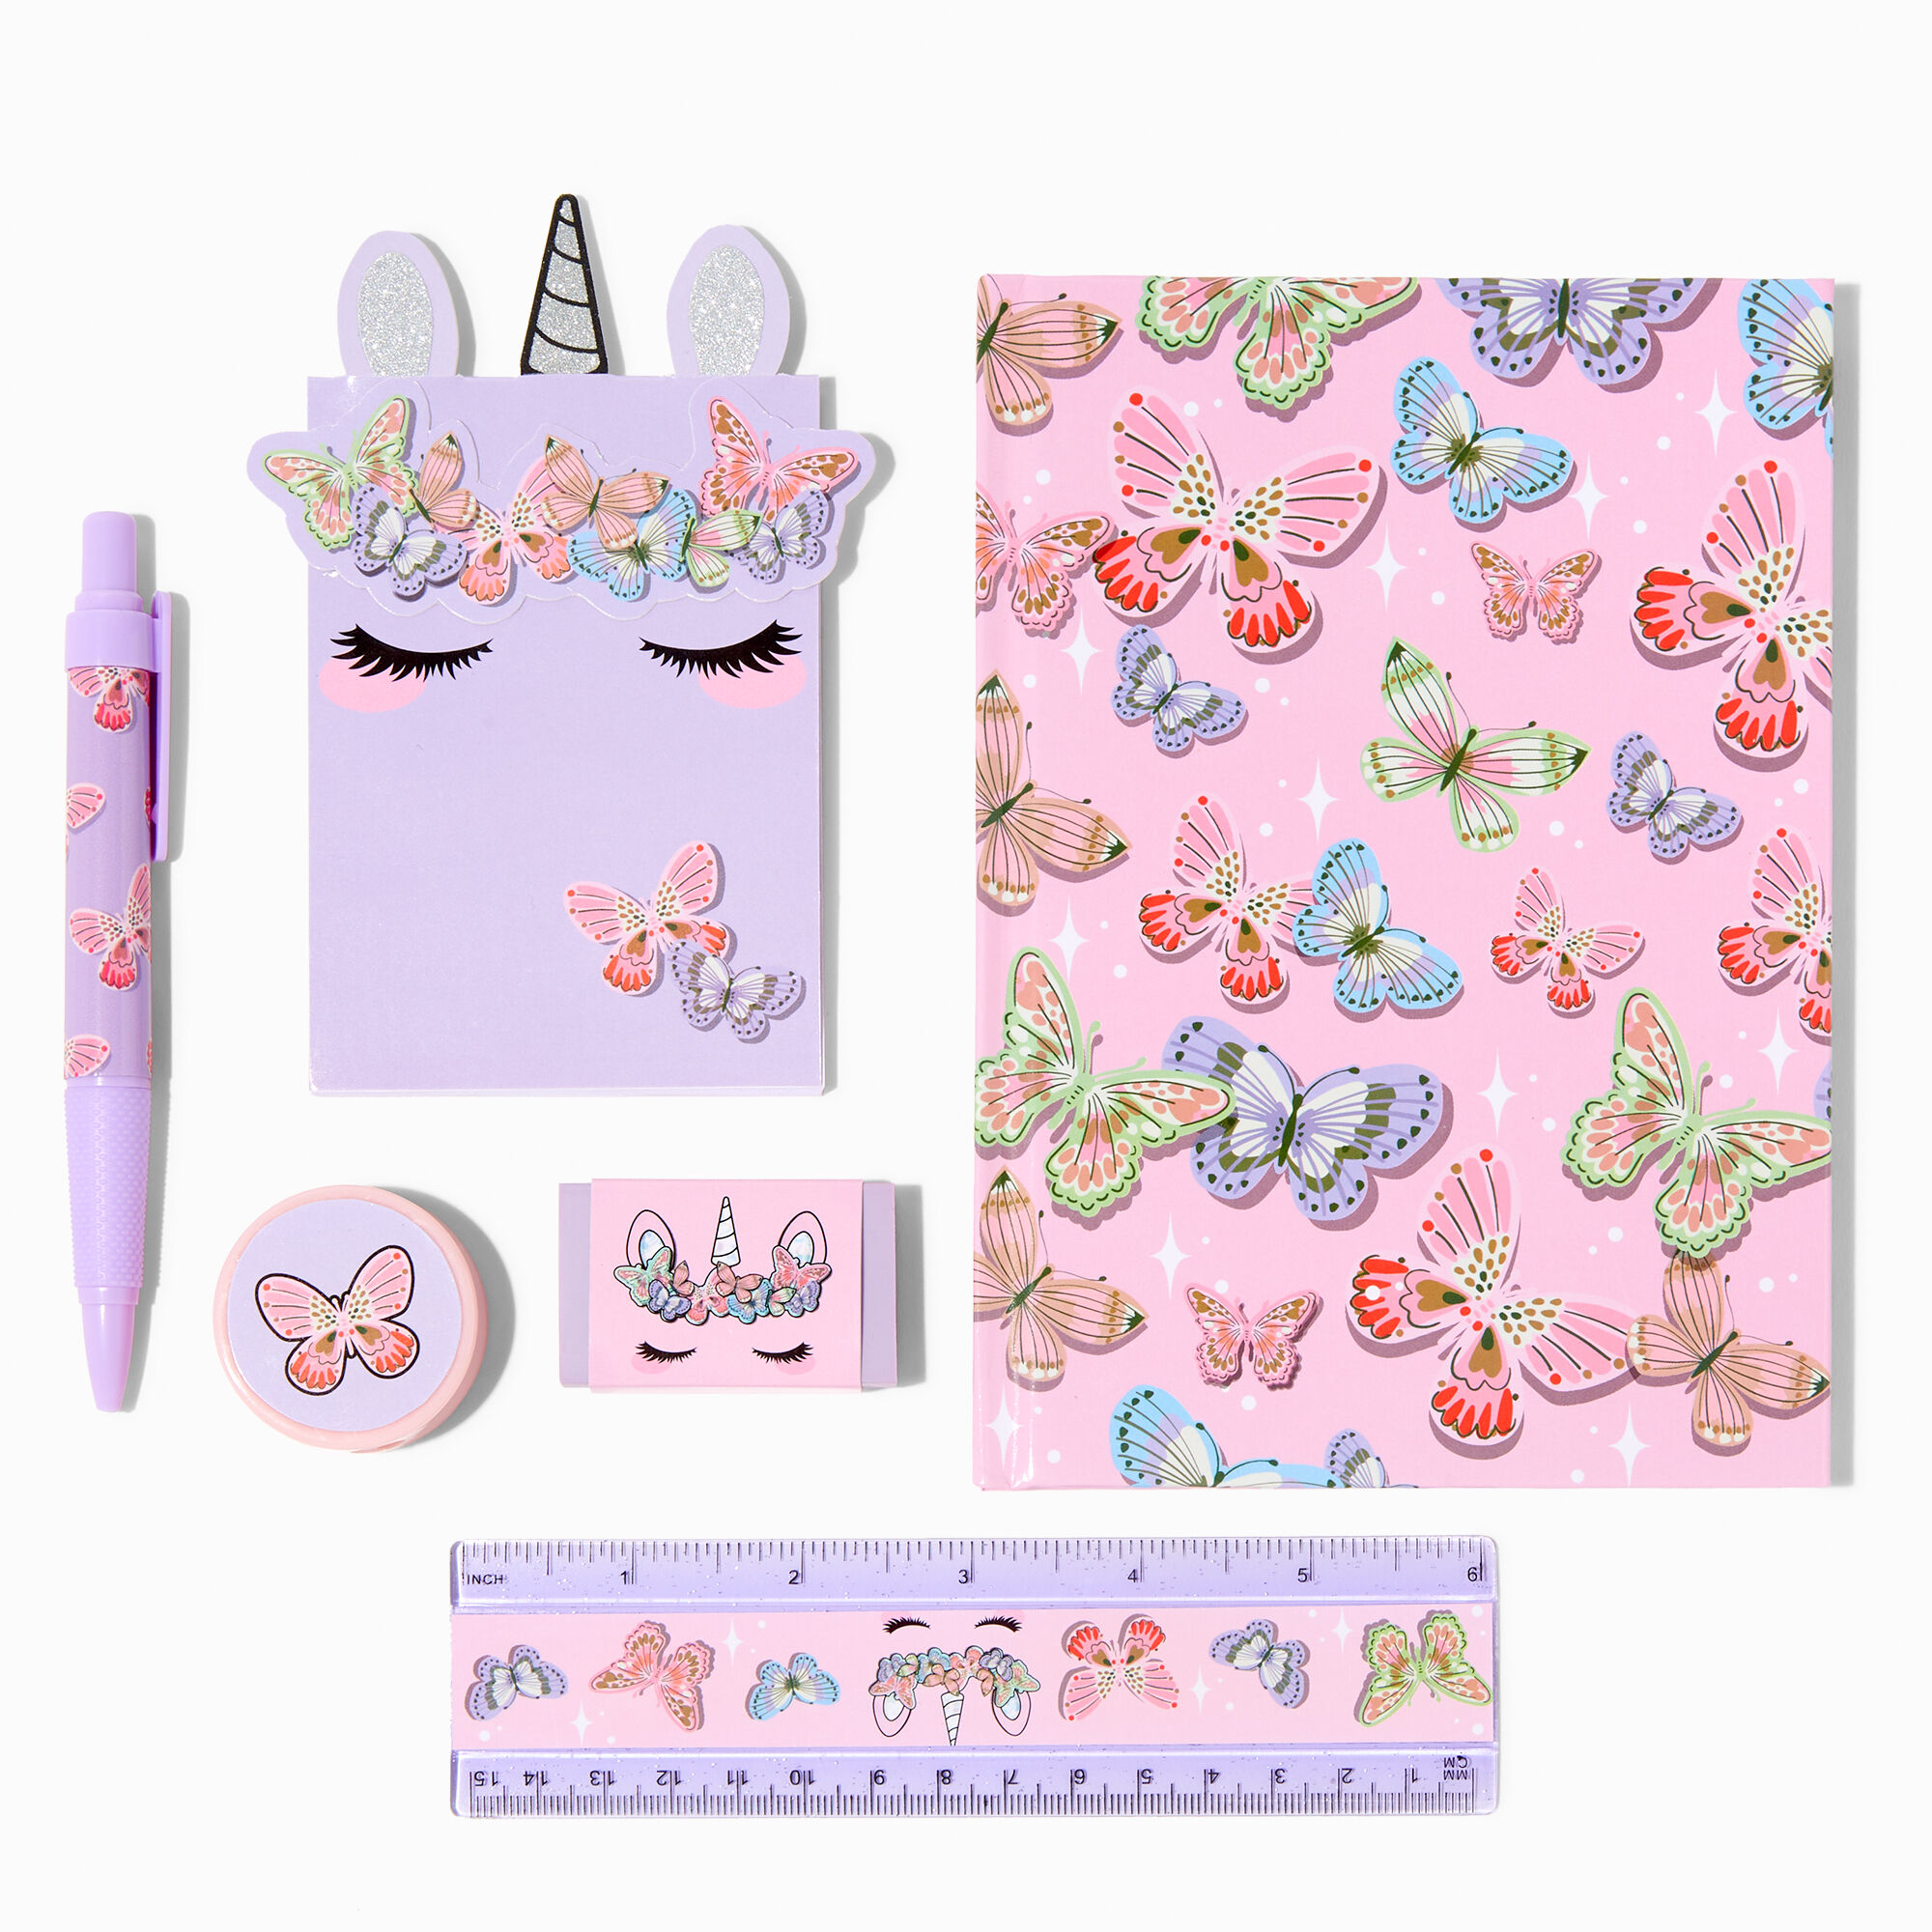 View Claires Butterfly Unicorn Stationery Set information